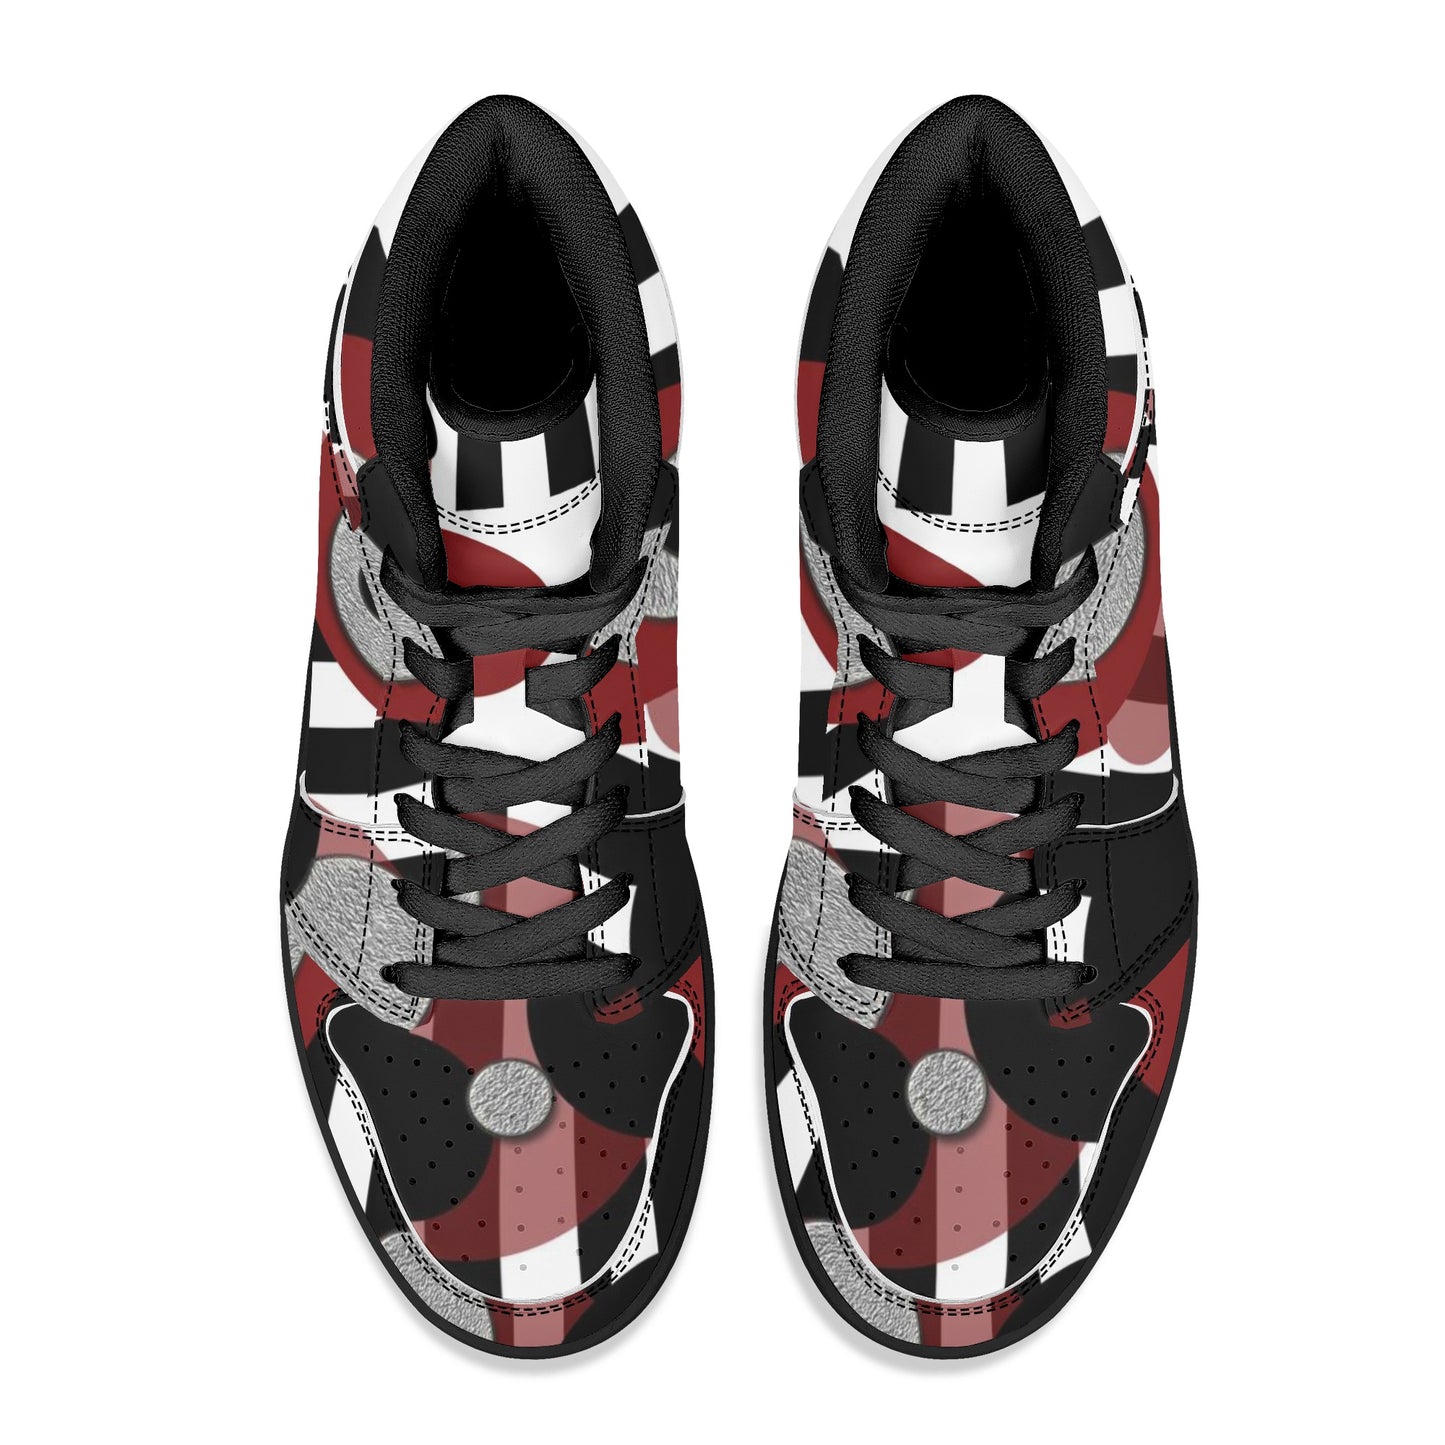 Black and White Stripes Red Dots Womens Black High Top Leather Sneakers